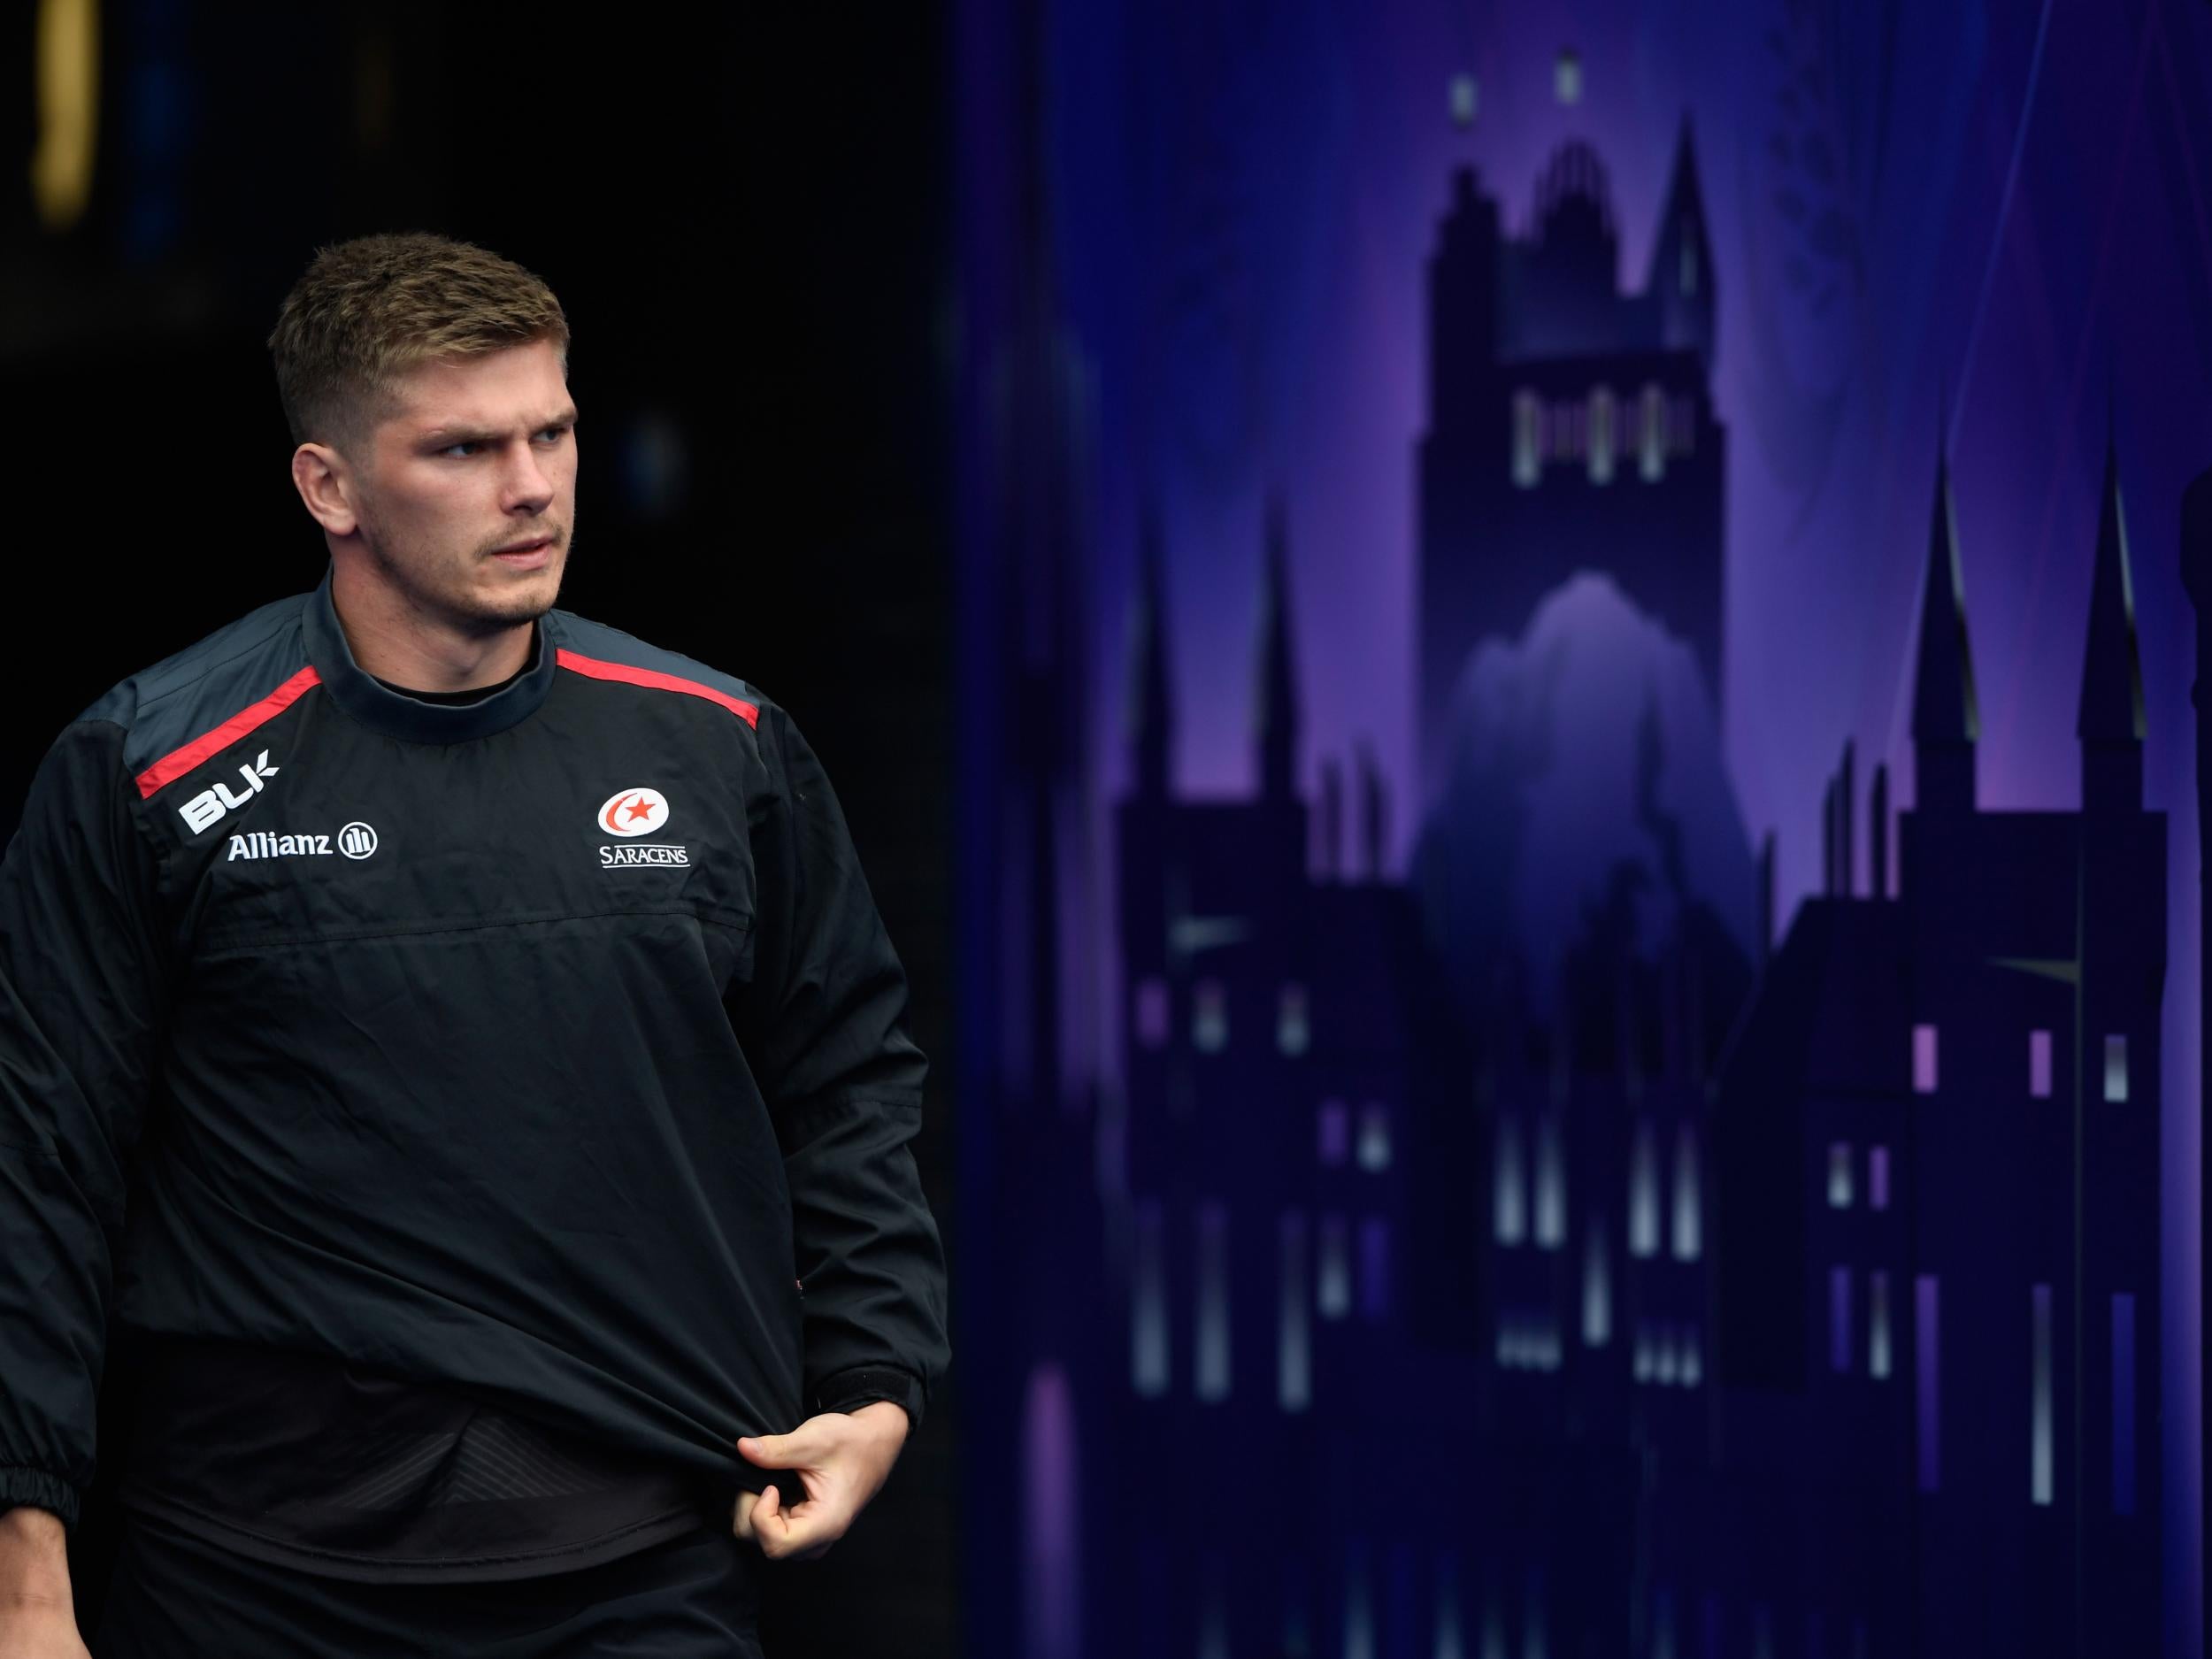 Owen Farrell will be key to the hopes of the English side